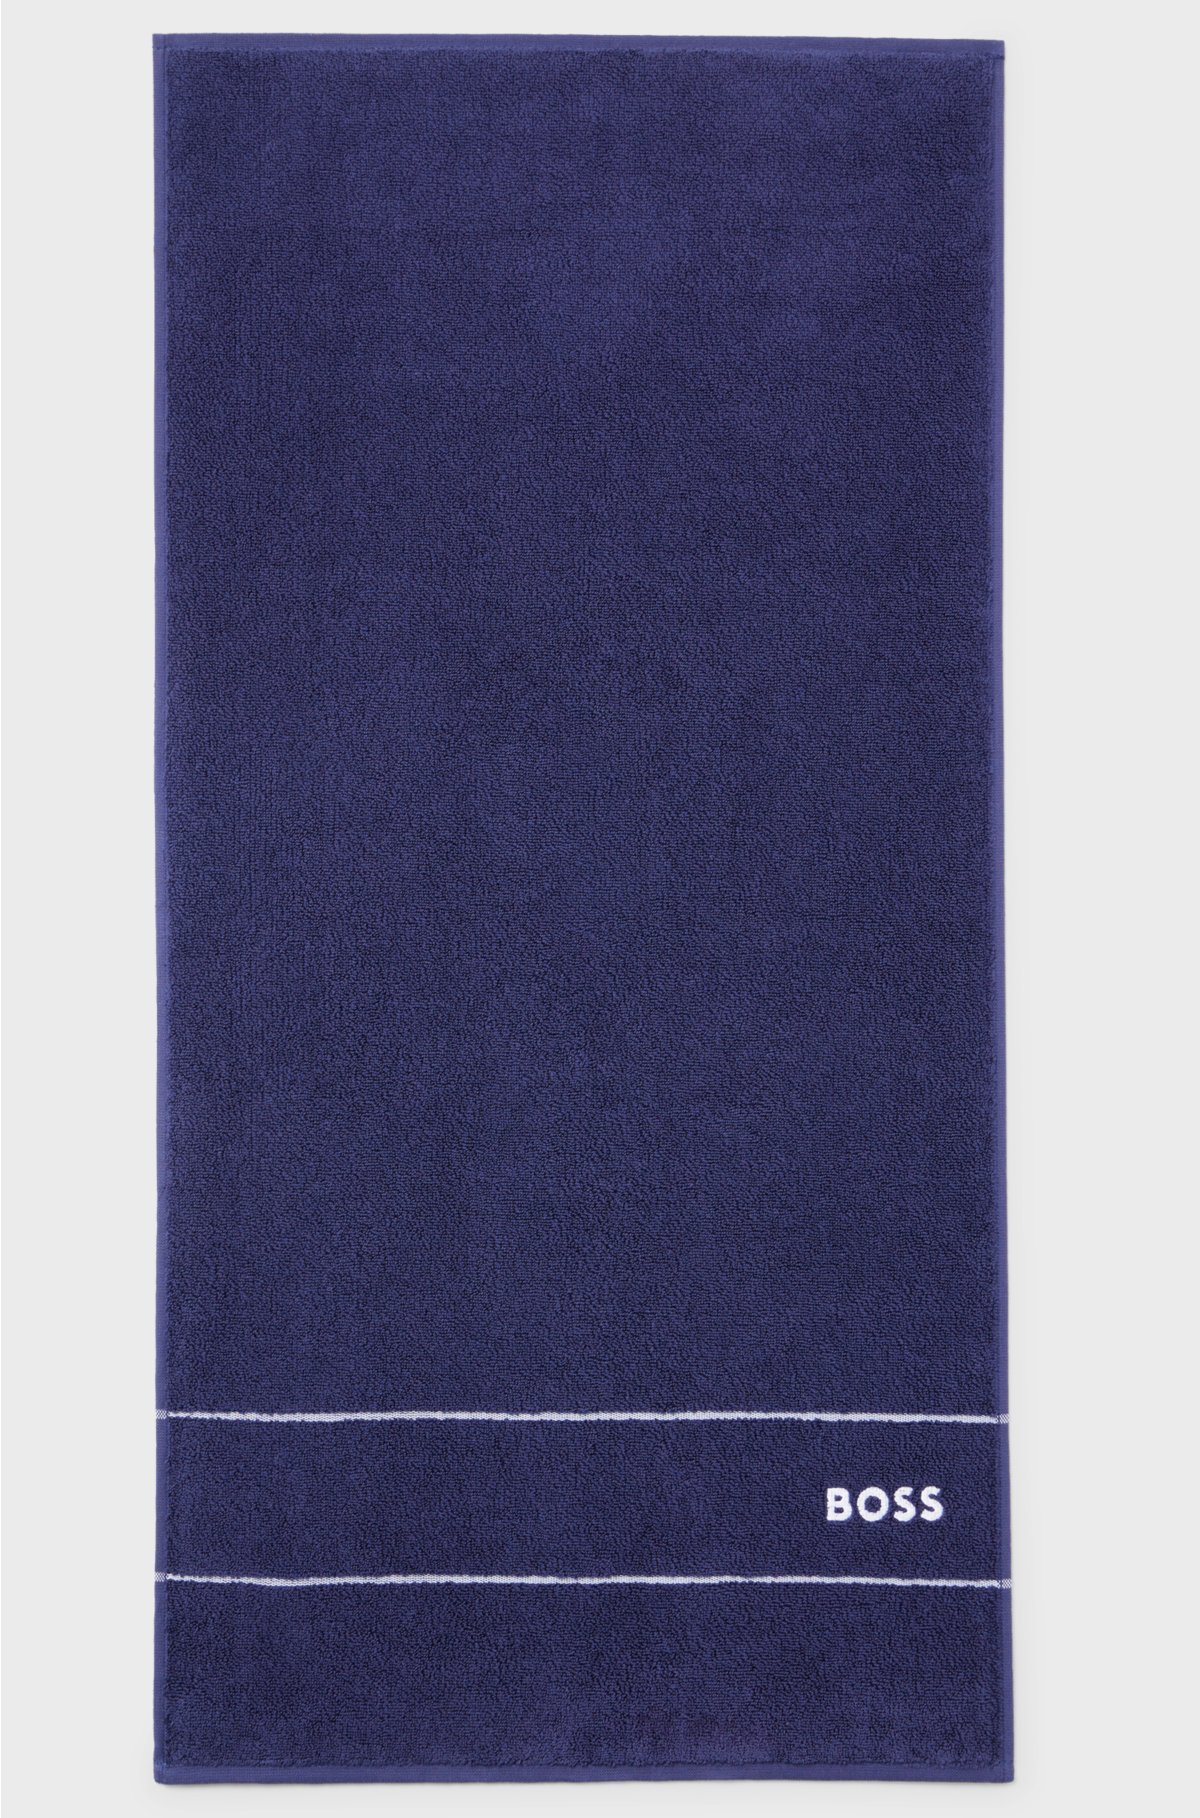 Cotton hand towel with white logo embroidery, Dark Blue